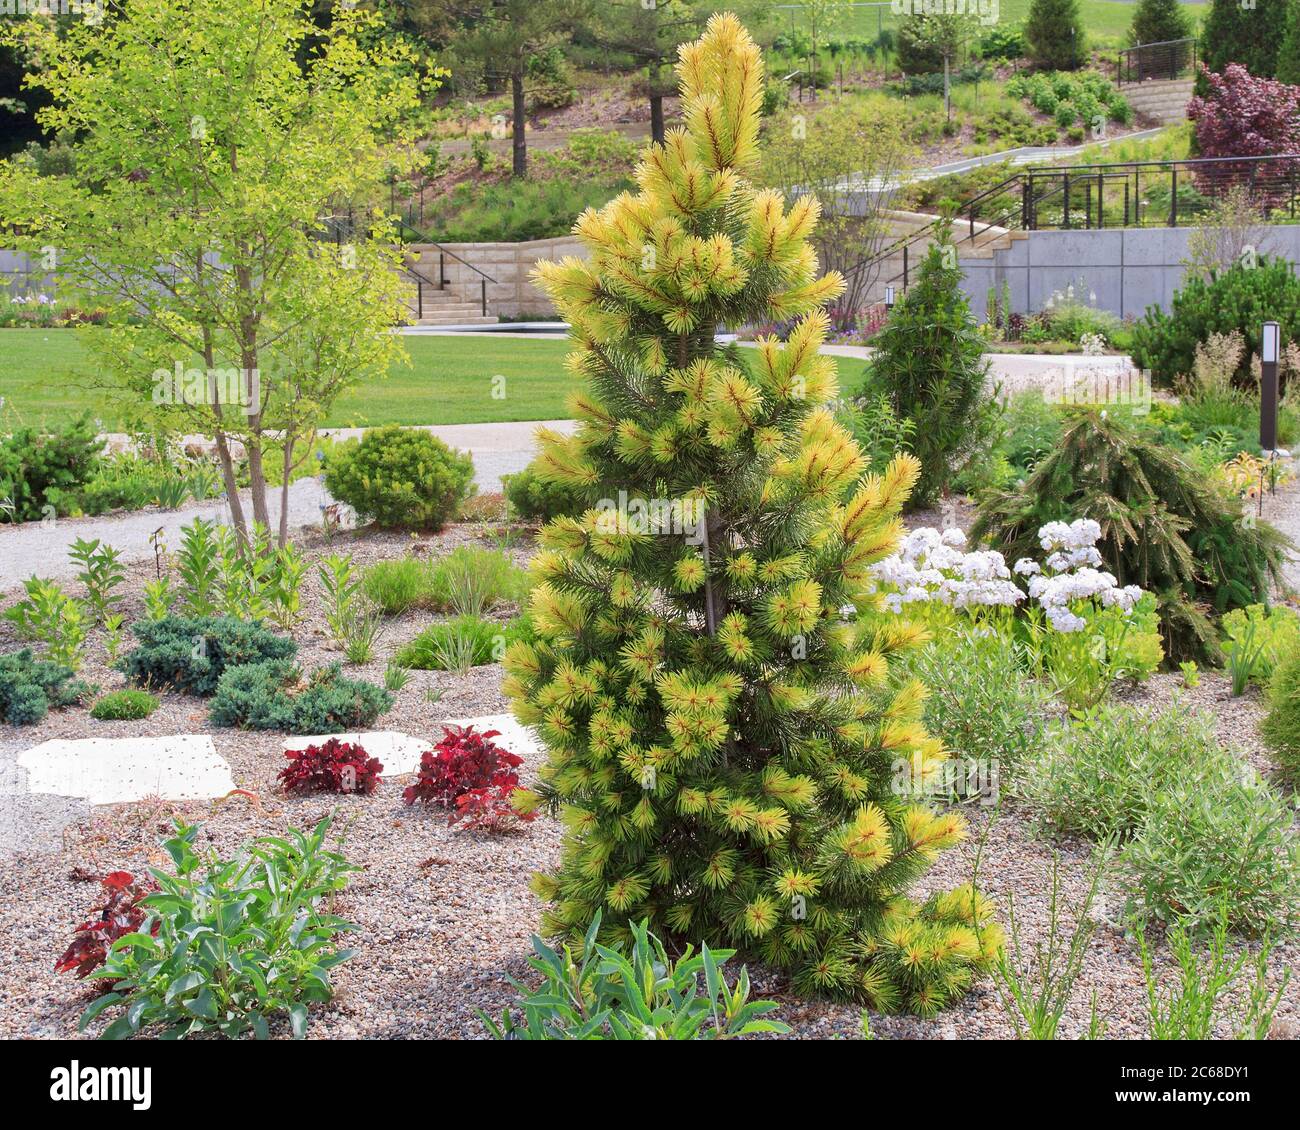 'Taylor Sunburst' Lodgepole pine in the landscape. Vibrant yellow and green needles adorn the branches. Stock Photo